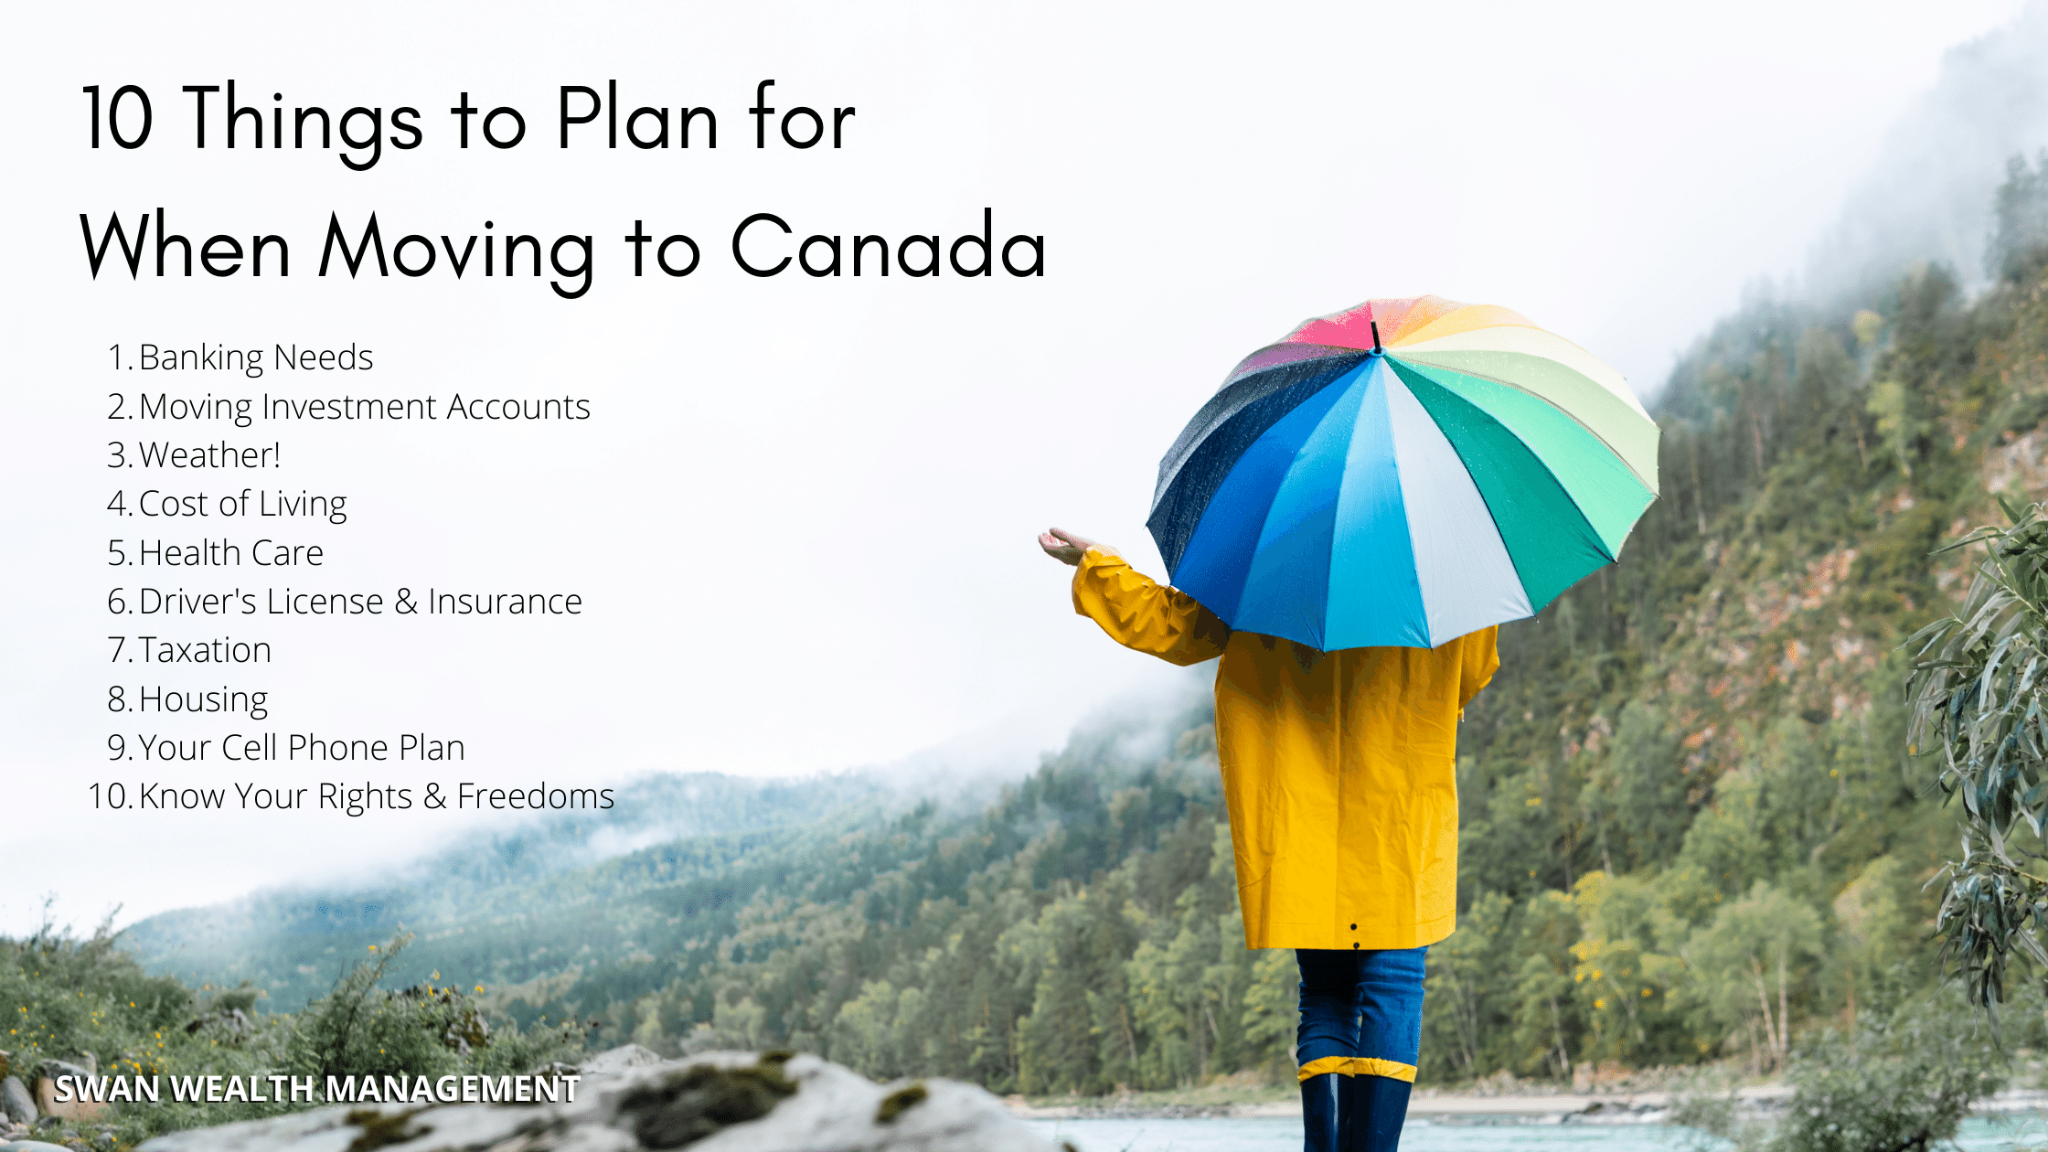 10 essential things you need to know before moving to Canada list